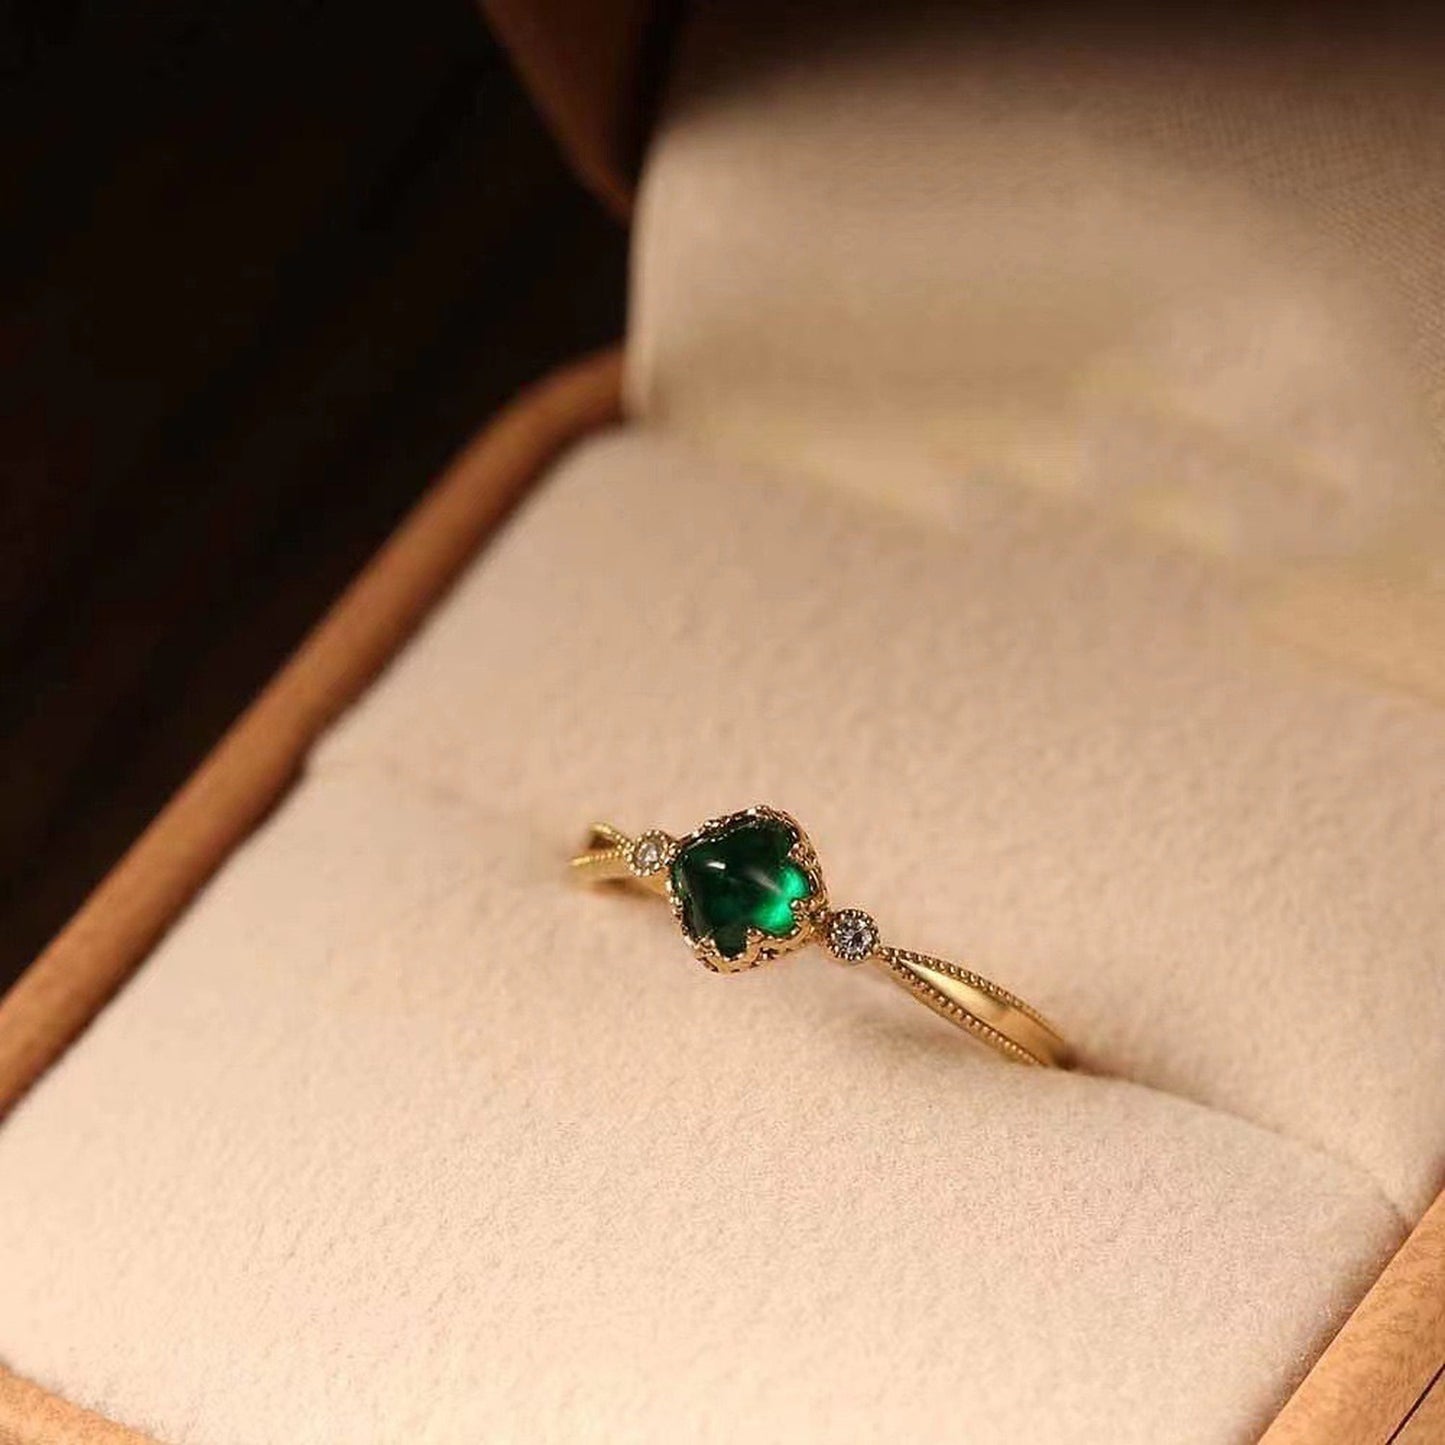 Handmade emerald gold ring, Green emerald lace ring, Multi-stone minimalist ring, Round emerald ring, Vintage emerald cz ring, Delicate Gift